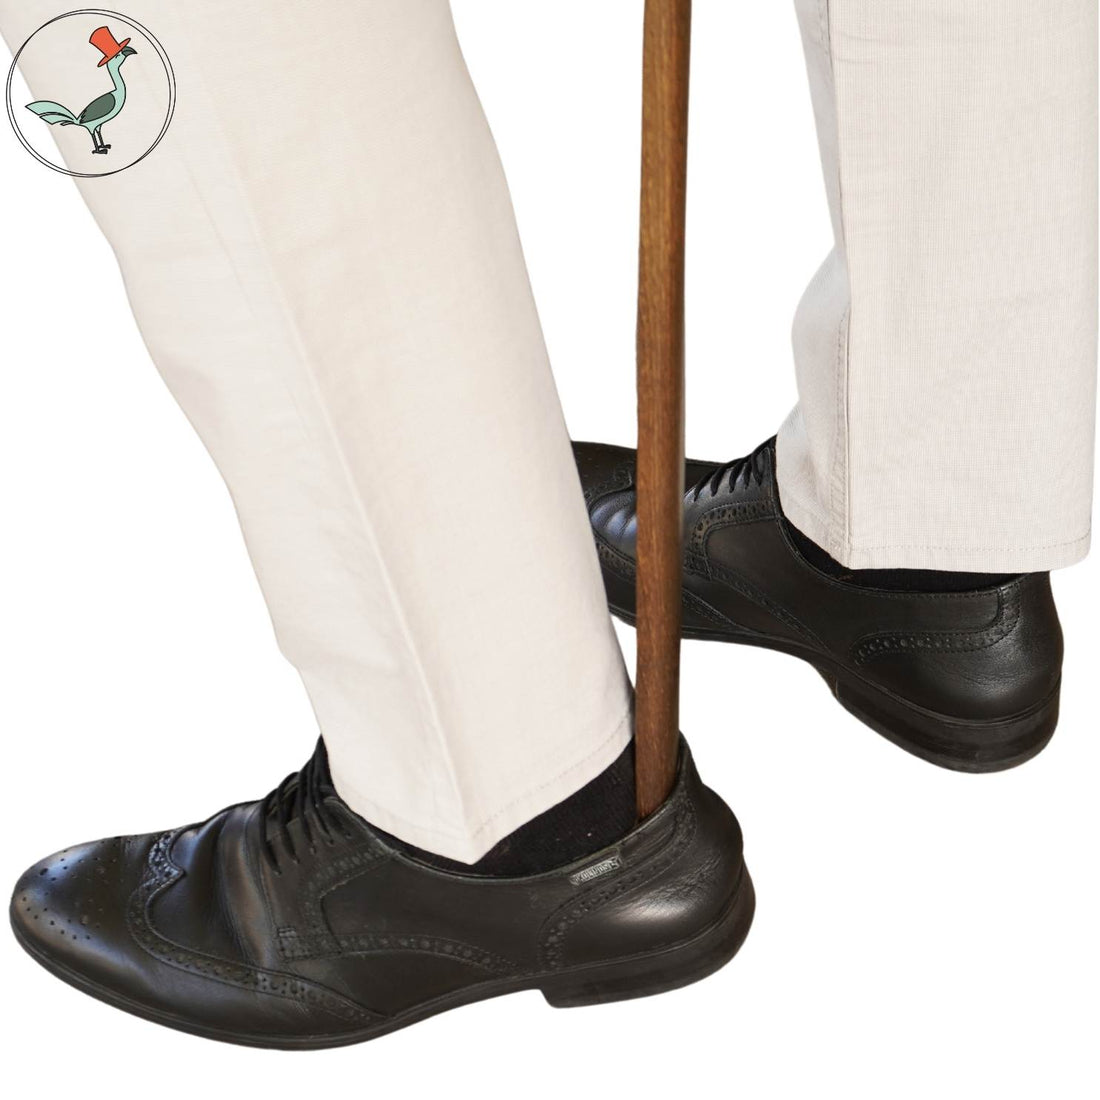 person using the extra long wooden shoe horn while standing